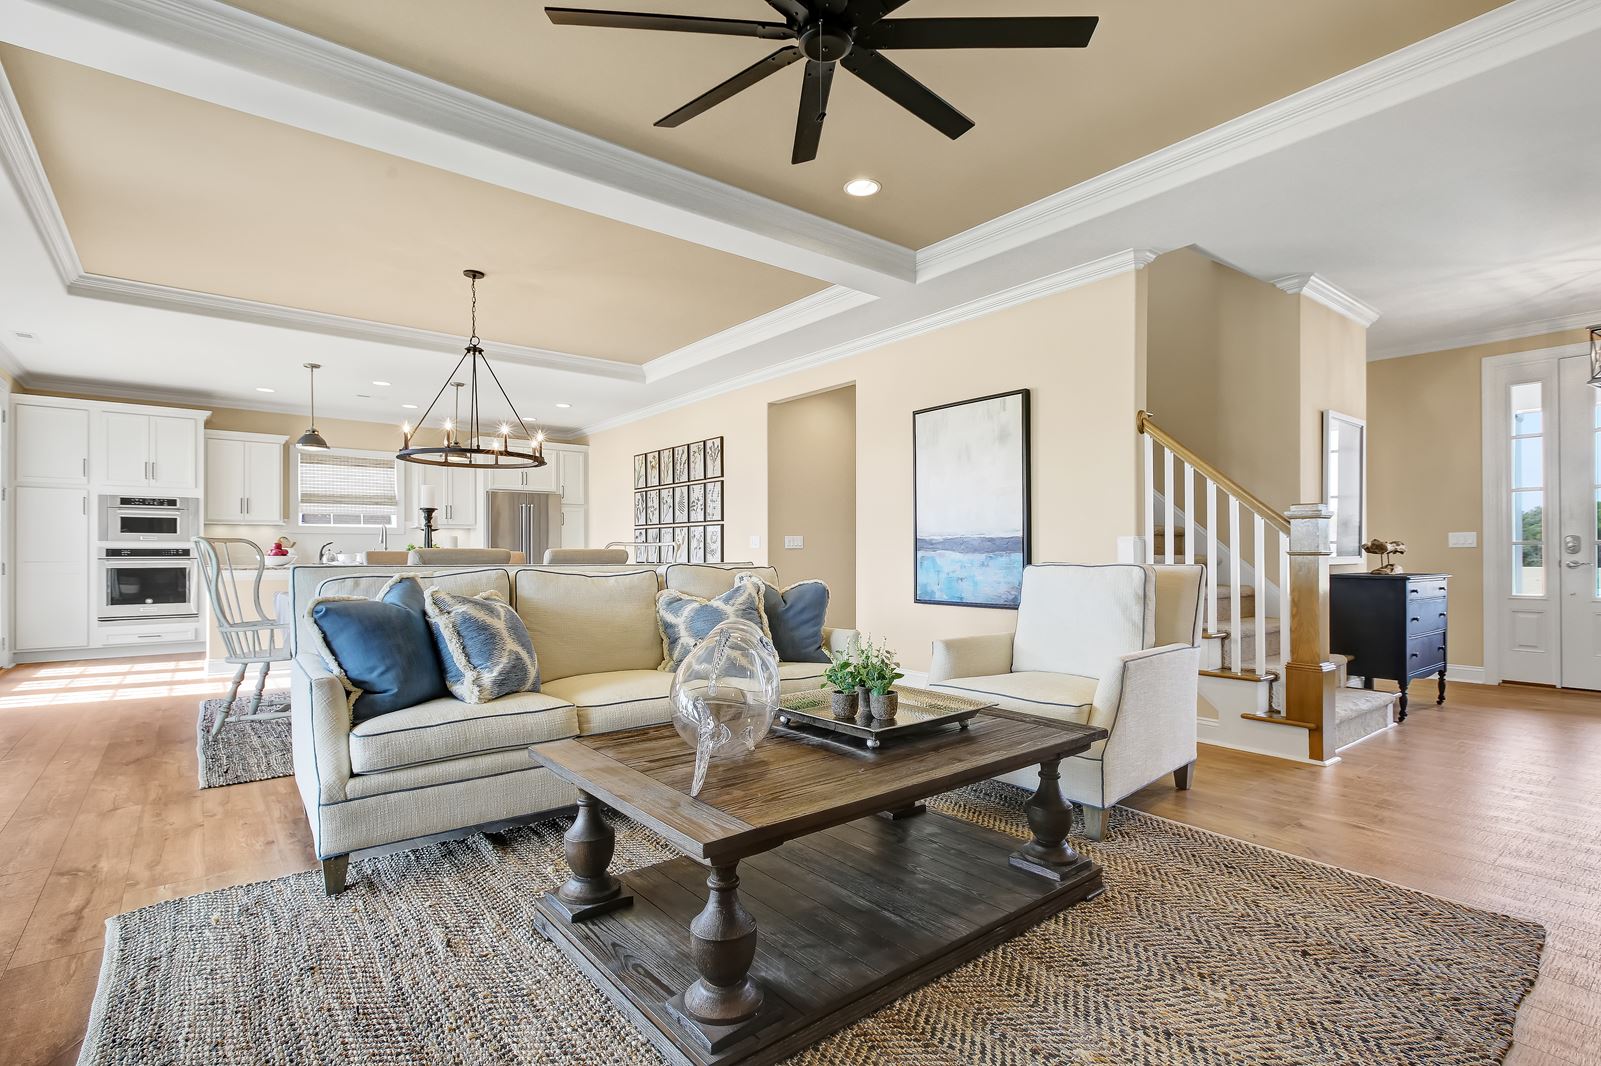 The living room of the Mitchell model home, built by the Trusst Builder Group in Riverlights